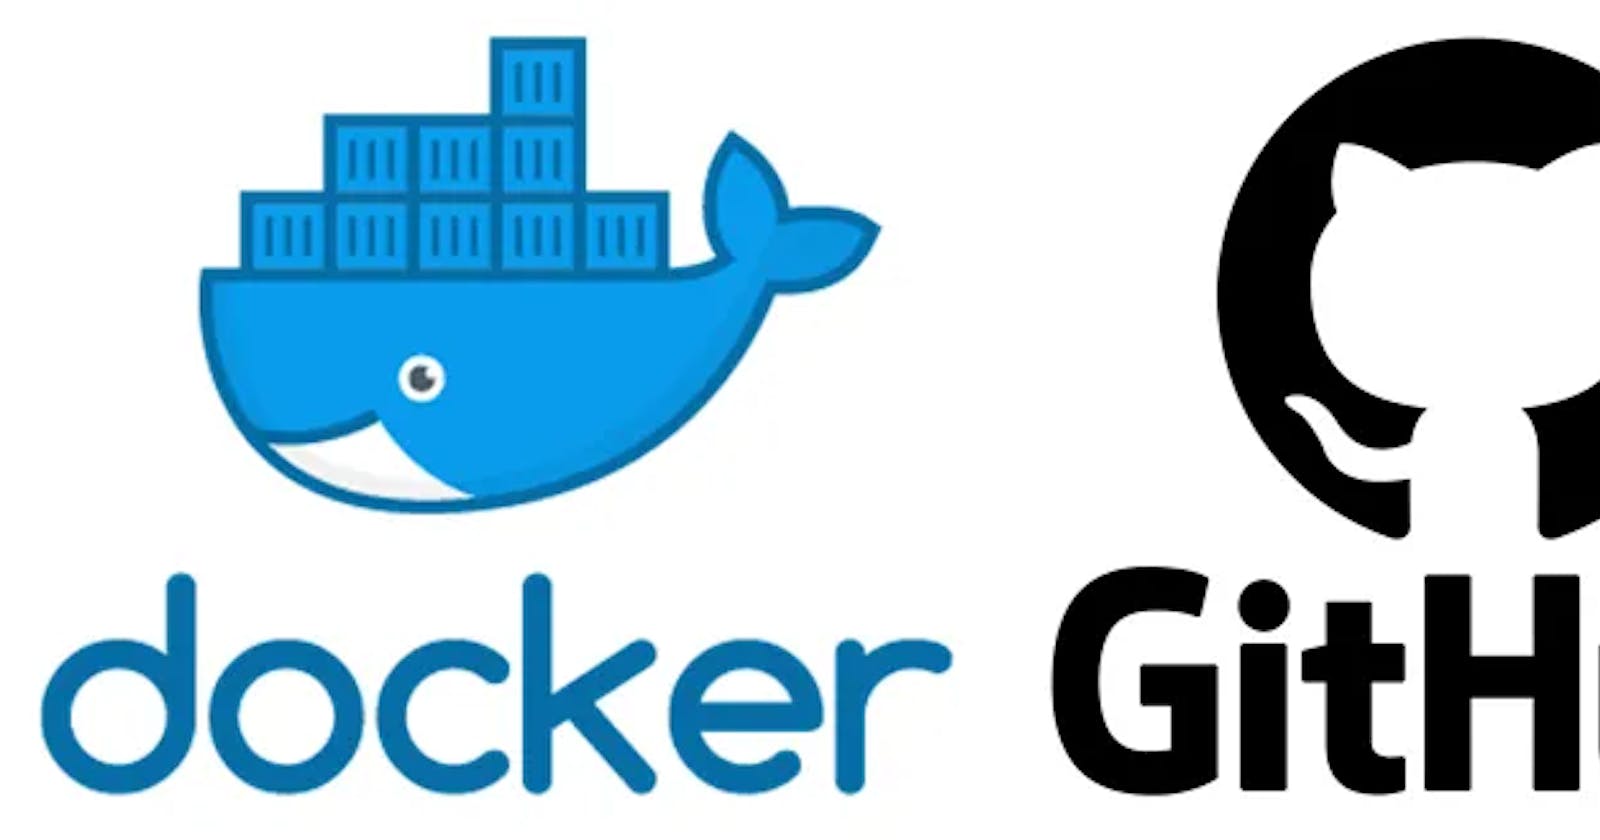 Automated Docker Image Build and Deployment with Jenkins in ec2 aws instance